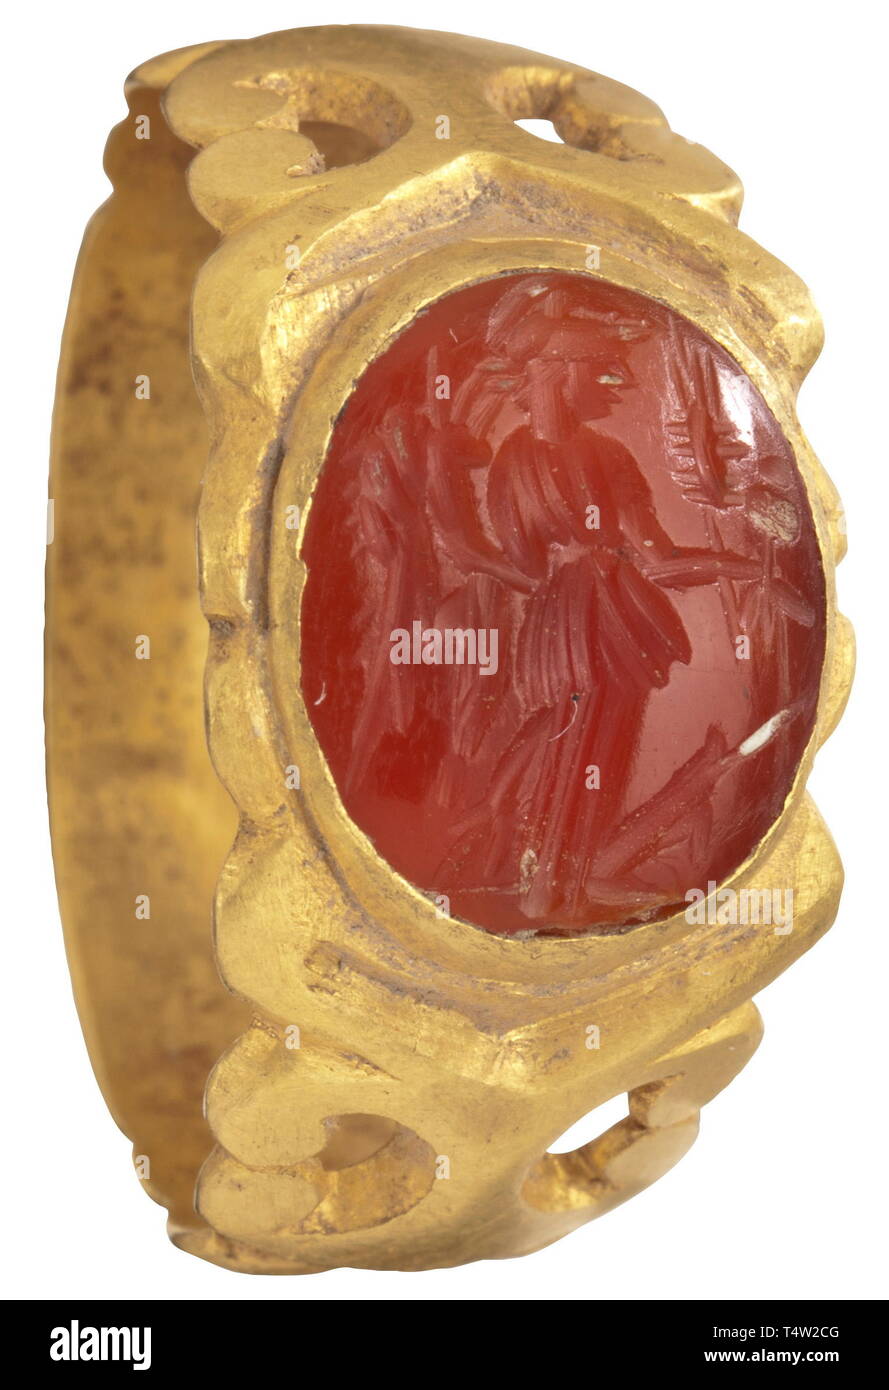 A Roman gold ring with Fortuna gem, 2nd/3rd century AD. Wide band with ornamental openwork, set with a carnelian. On the upper side a cut depiction of Fortuna. Width 2.3 cm, weight 9.83 g. Provenance: South German private collection, 1970s and later. historic, historical, Roman Empire, ancient world, ancient times, ancient world, Additional-Rights-Clearance-Info-Not-Available Stock Photo